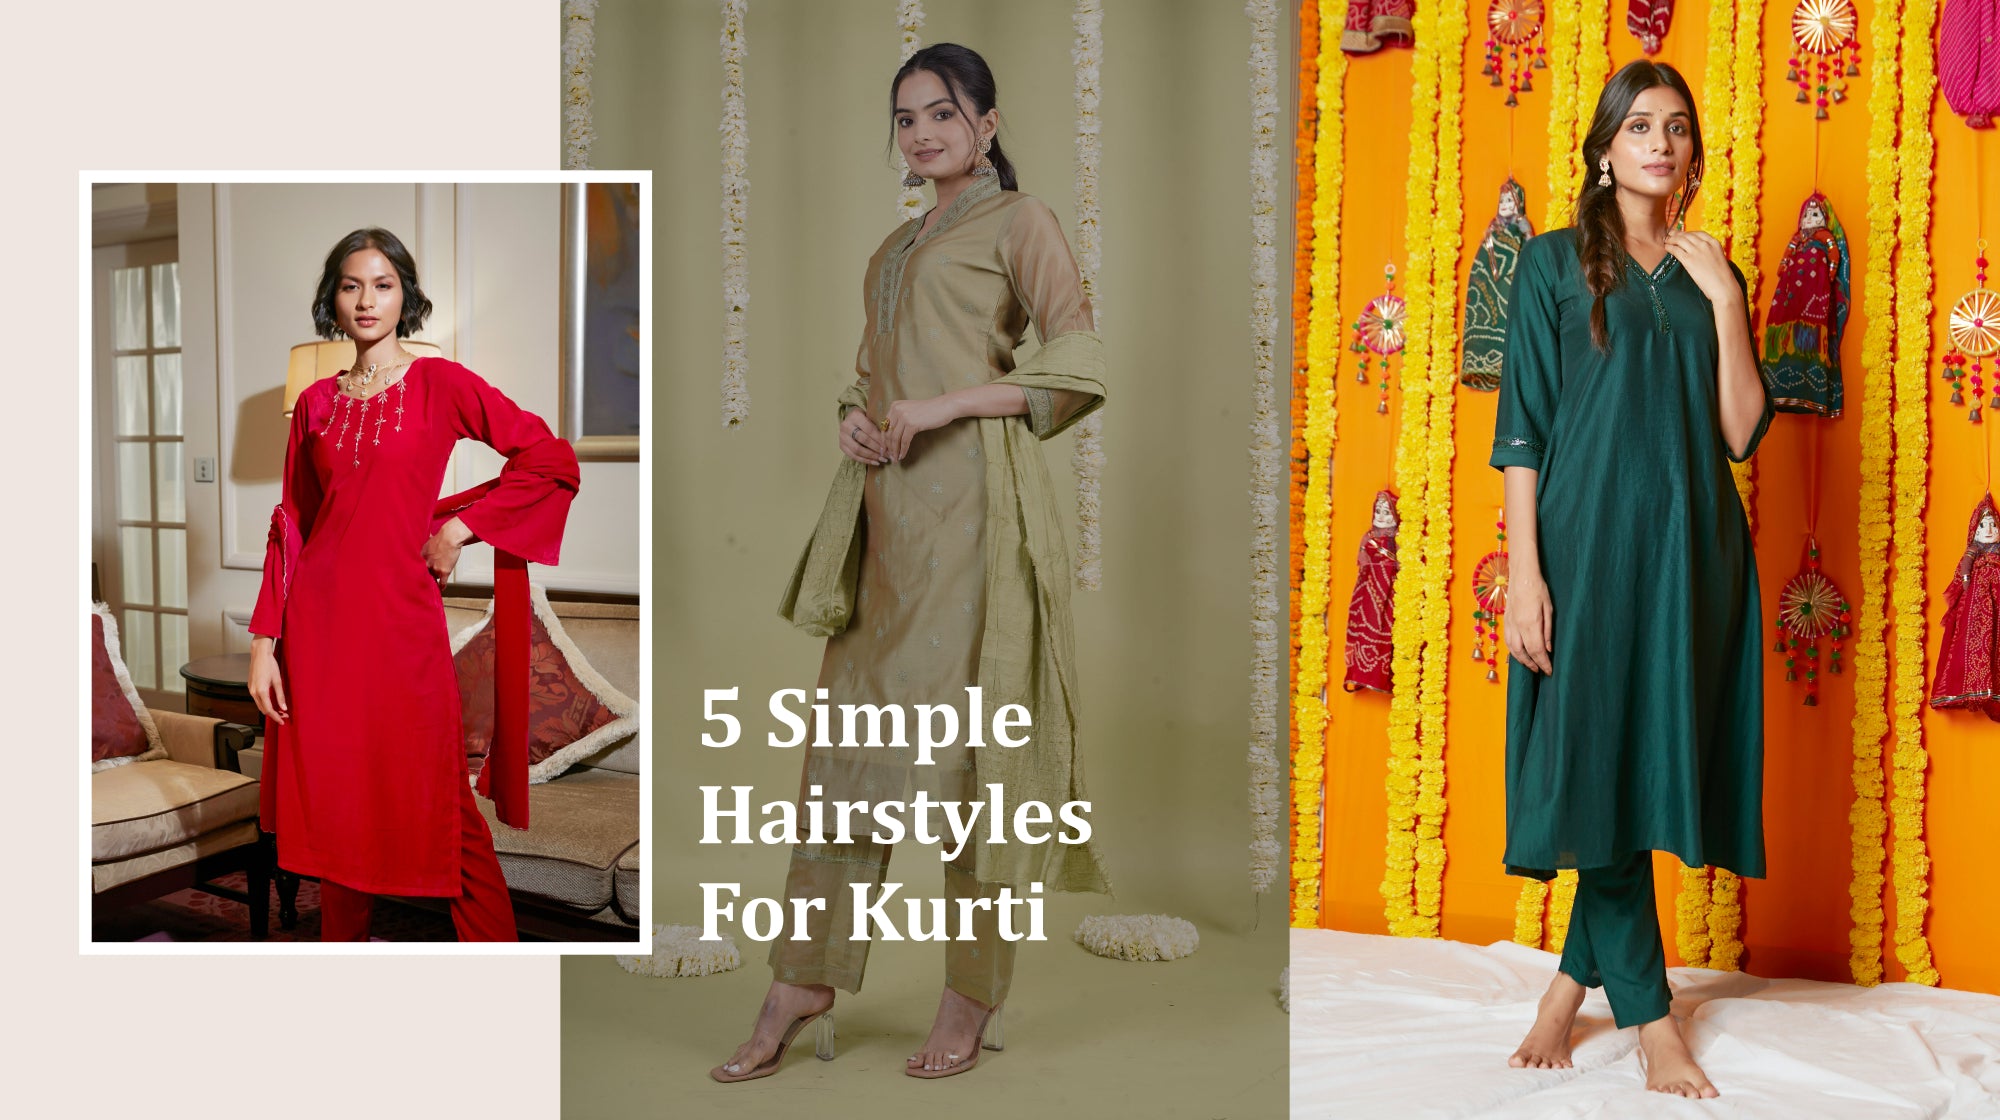 5 Simple Hairstyle For Kurti- Your Perfect Ethnic Look Awaits!